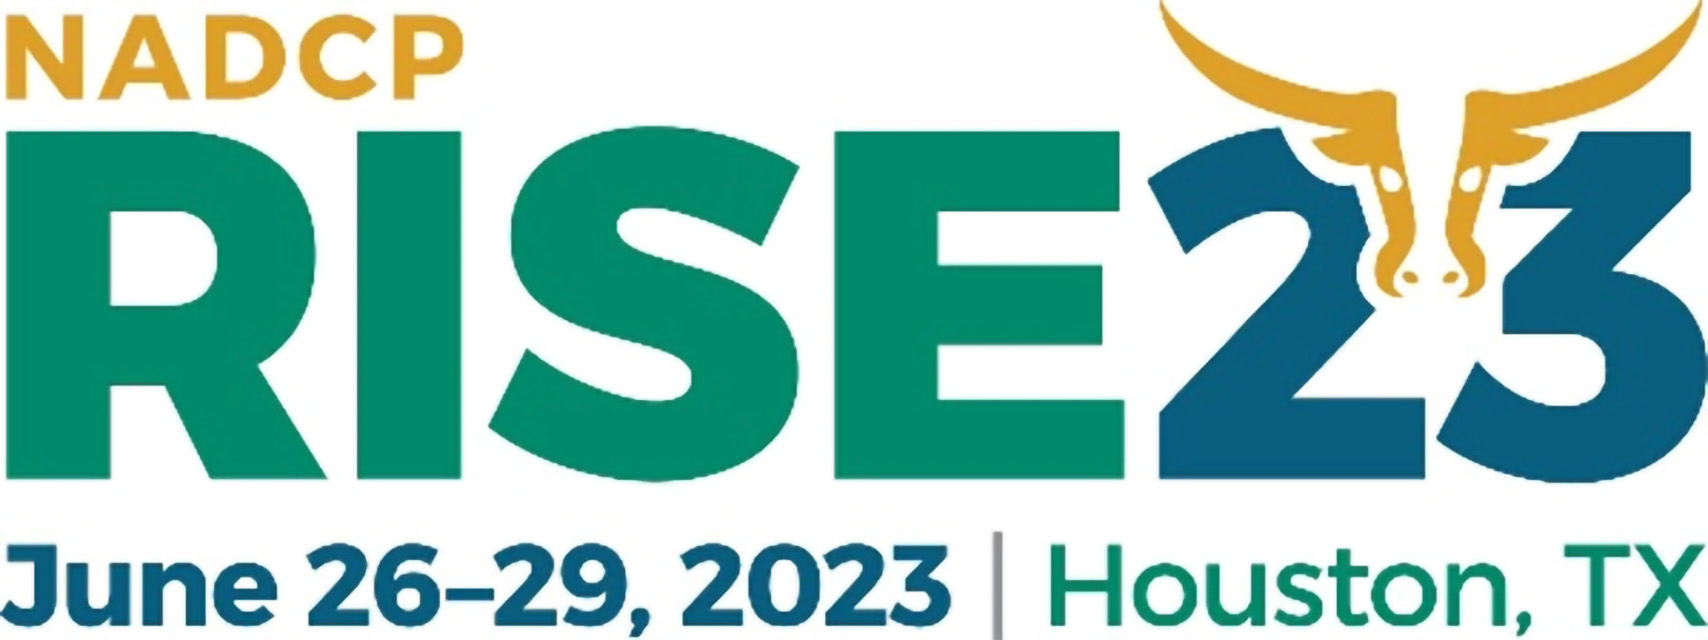 RISE23 conference logo